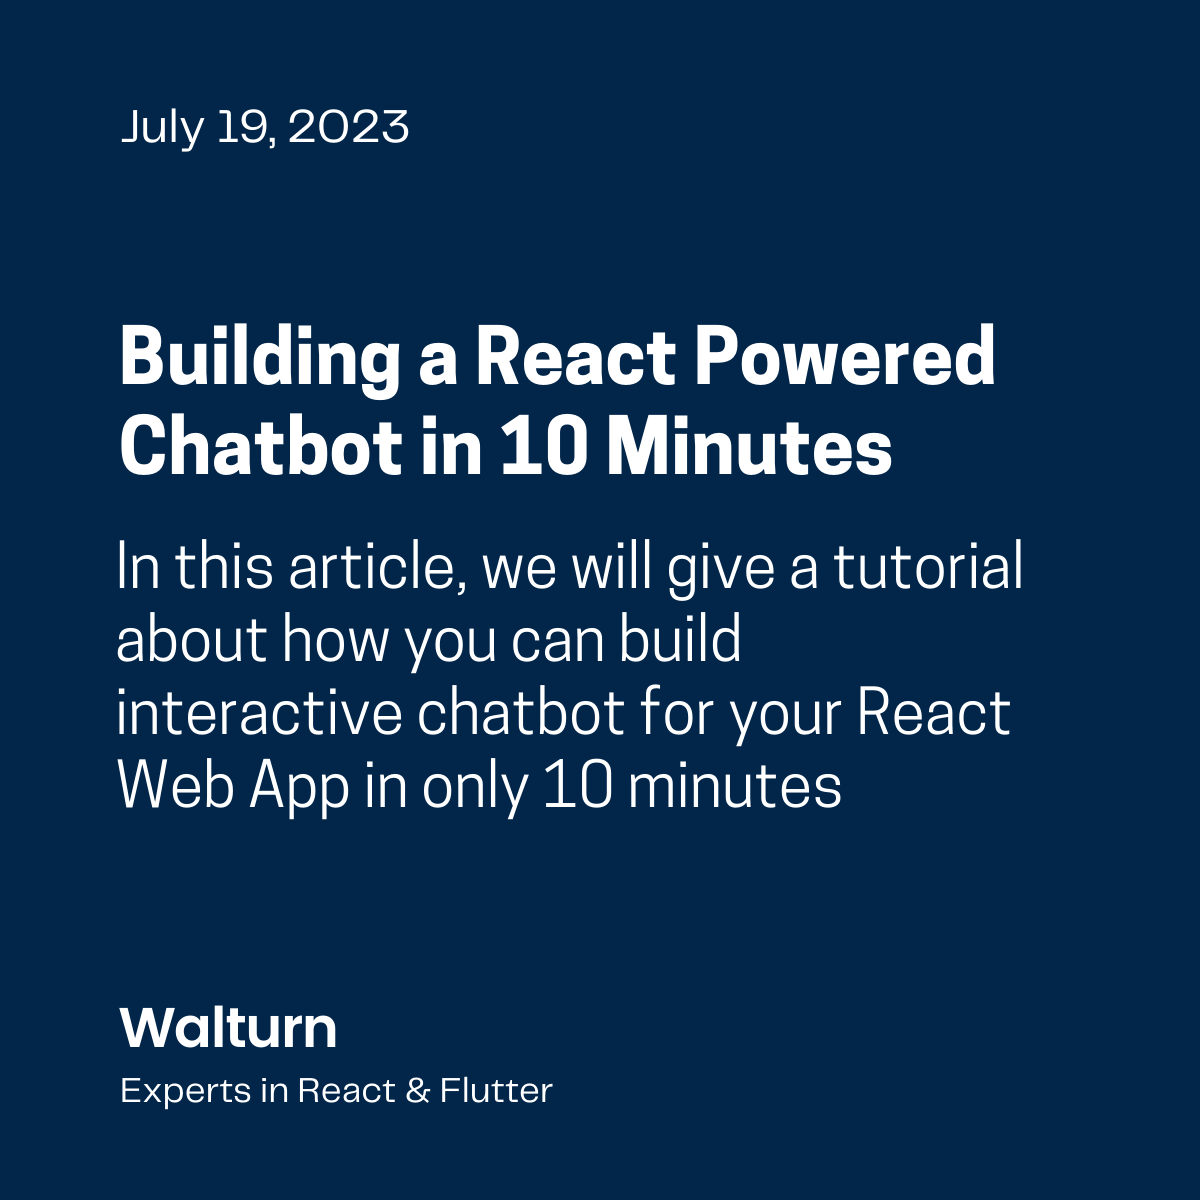 Building a React powered chatbot in 10 minutes — Walturn